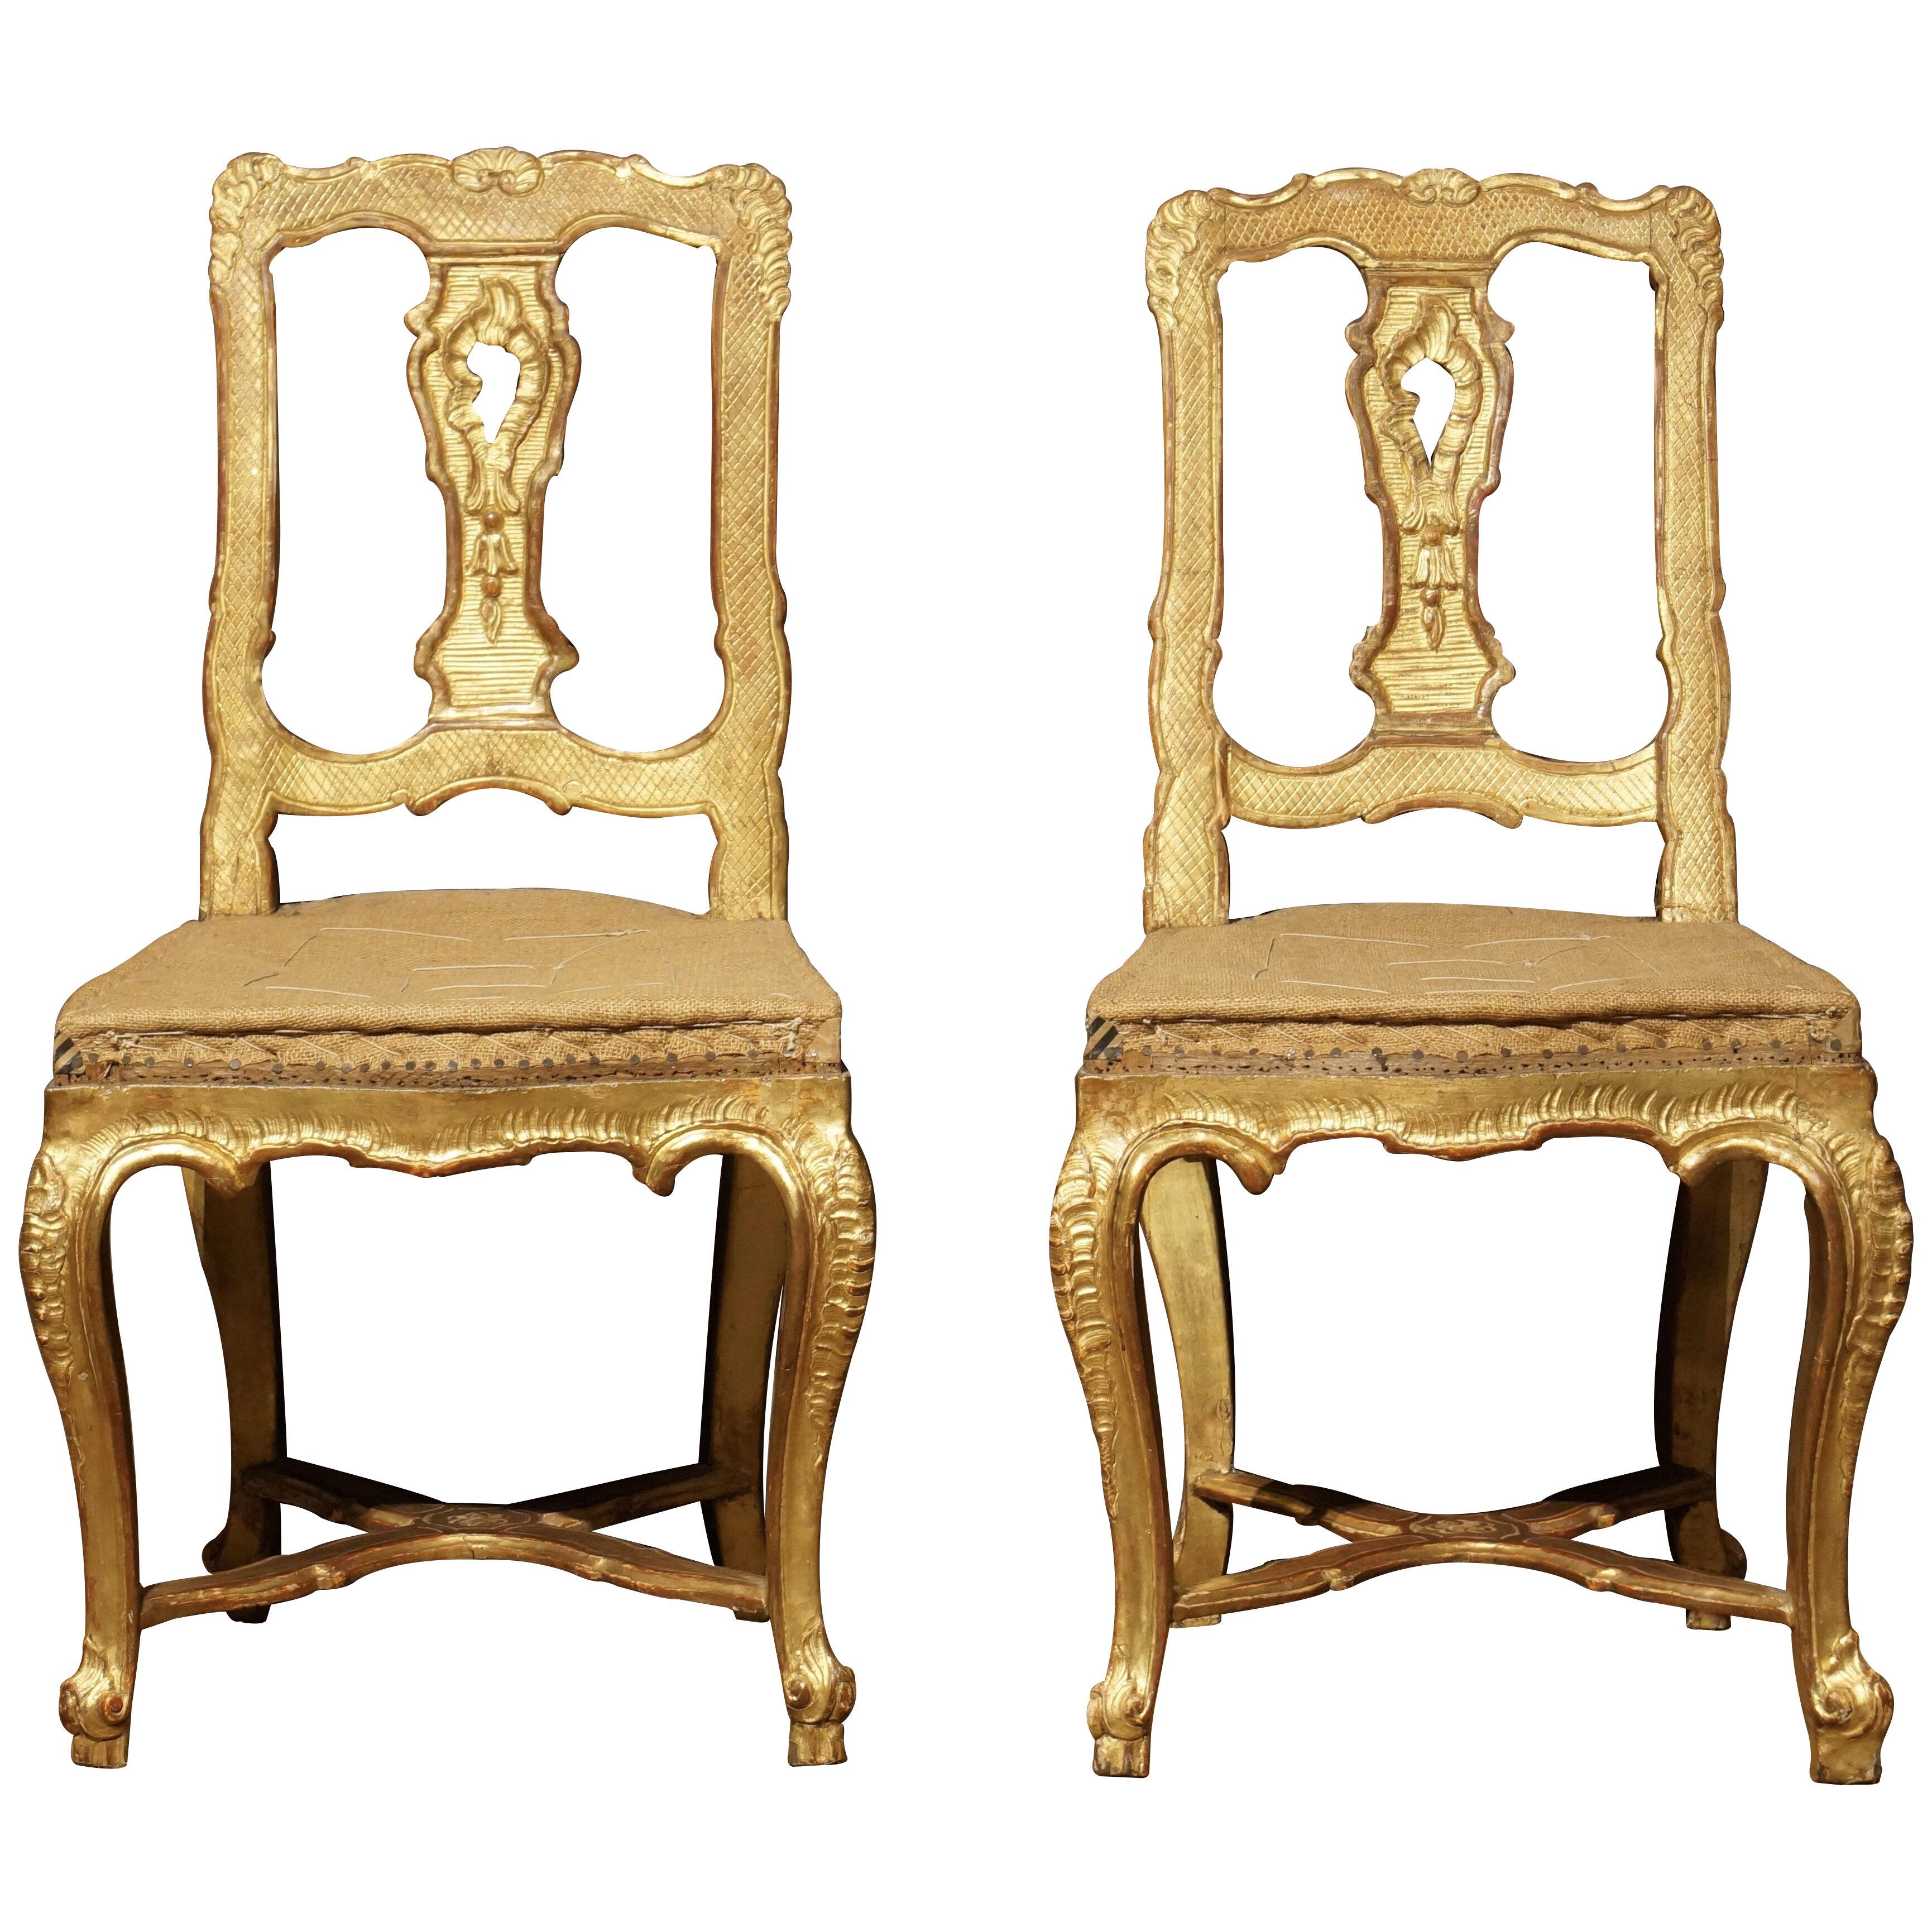 Pair of early 18th century French carved giltwood chairs